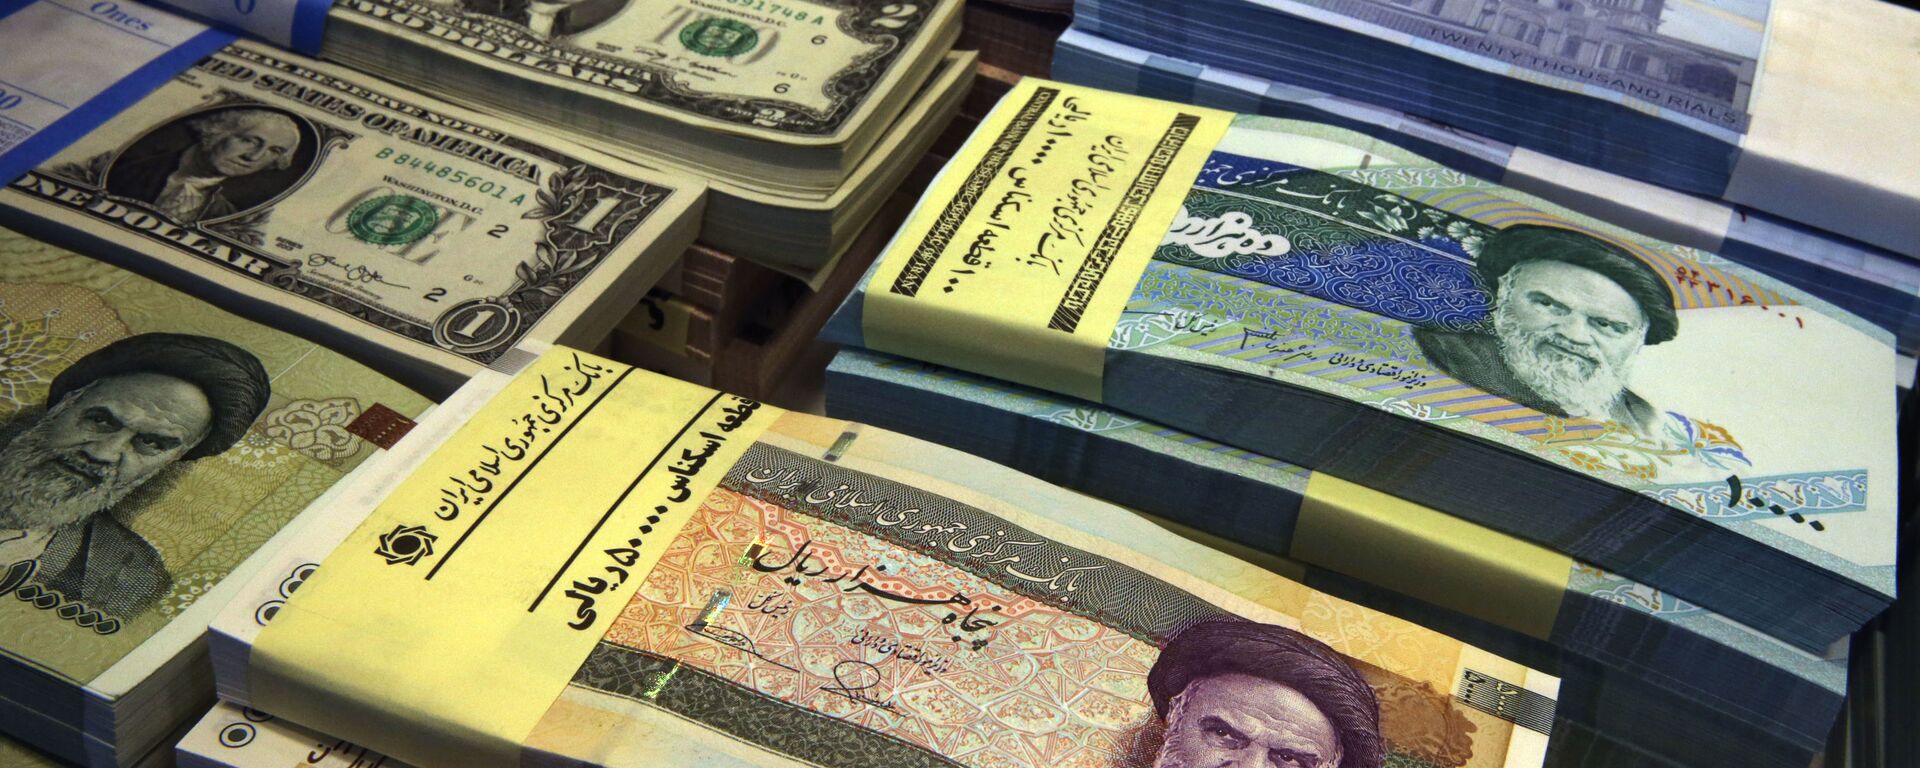 In this 4 April 2015 file photo, Iranian and U.S. banknotes are on display at a currency exchange shop in downtown Tehran, Iran. Iran's president has sent a bill to Parliament that would cut four zeroes from the value of the nation's sanctions-battered currency, the rial. Semi-official news agencies reported the news on Wednesday, 21 August 2019, saying President Hassan Rouhani sent the bill with urgency to the Parliament to consider. Iran's rial has been hammered by the effects of increasing US sanctions on the country. - Sputnik International, 1920, 13.10.2020